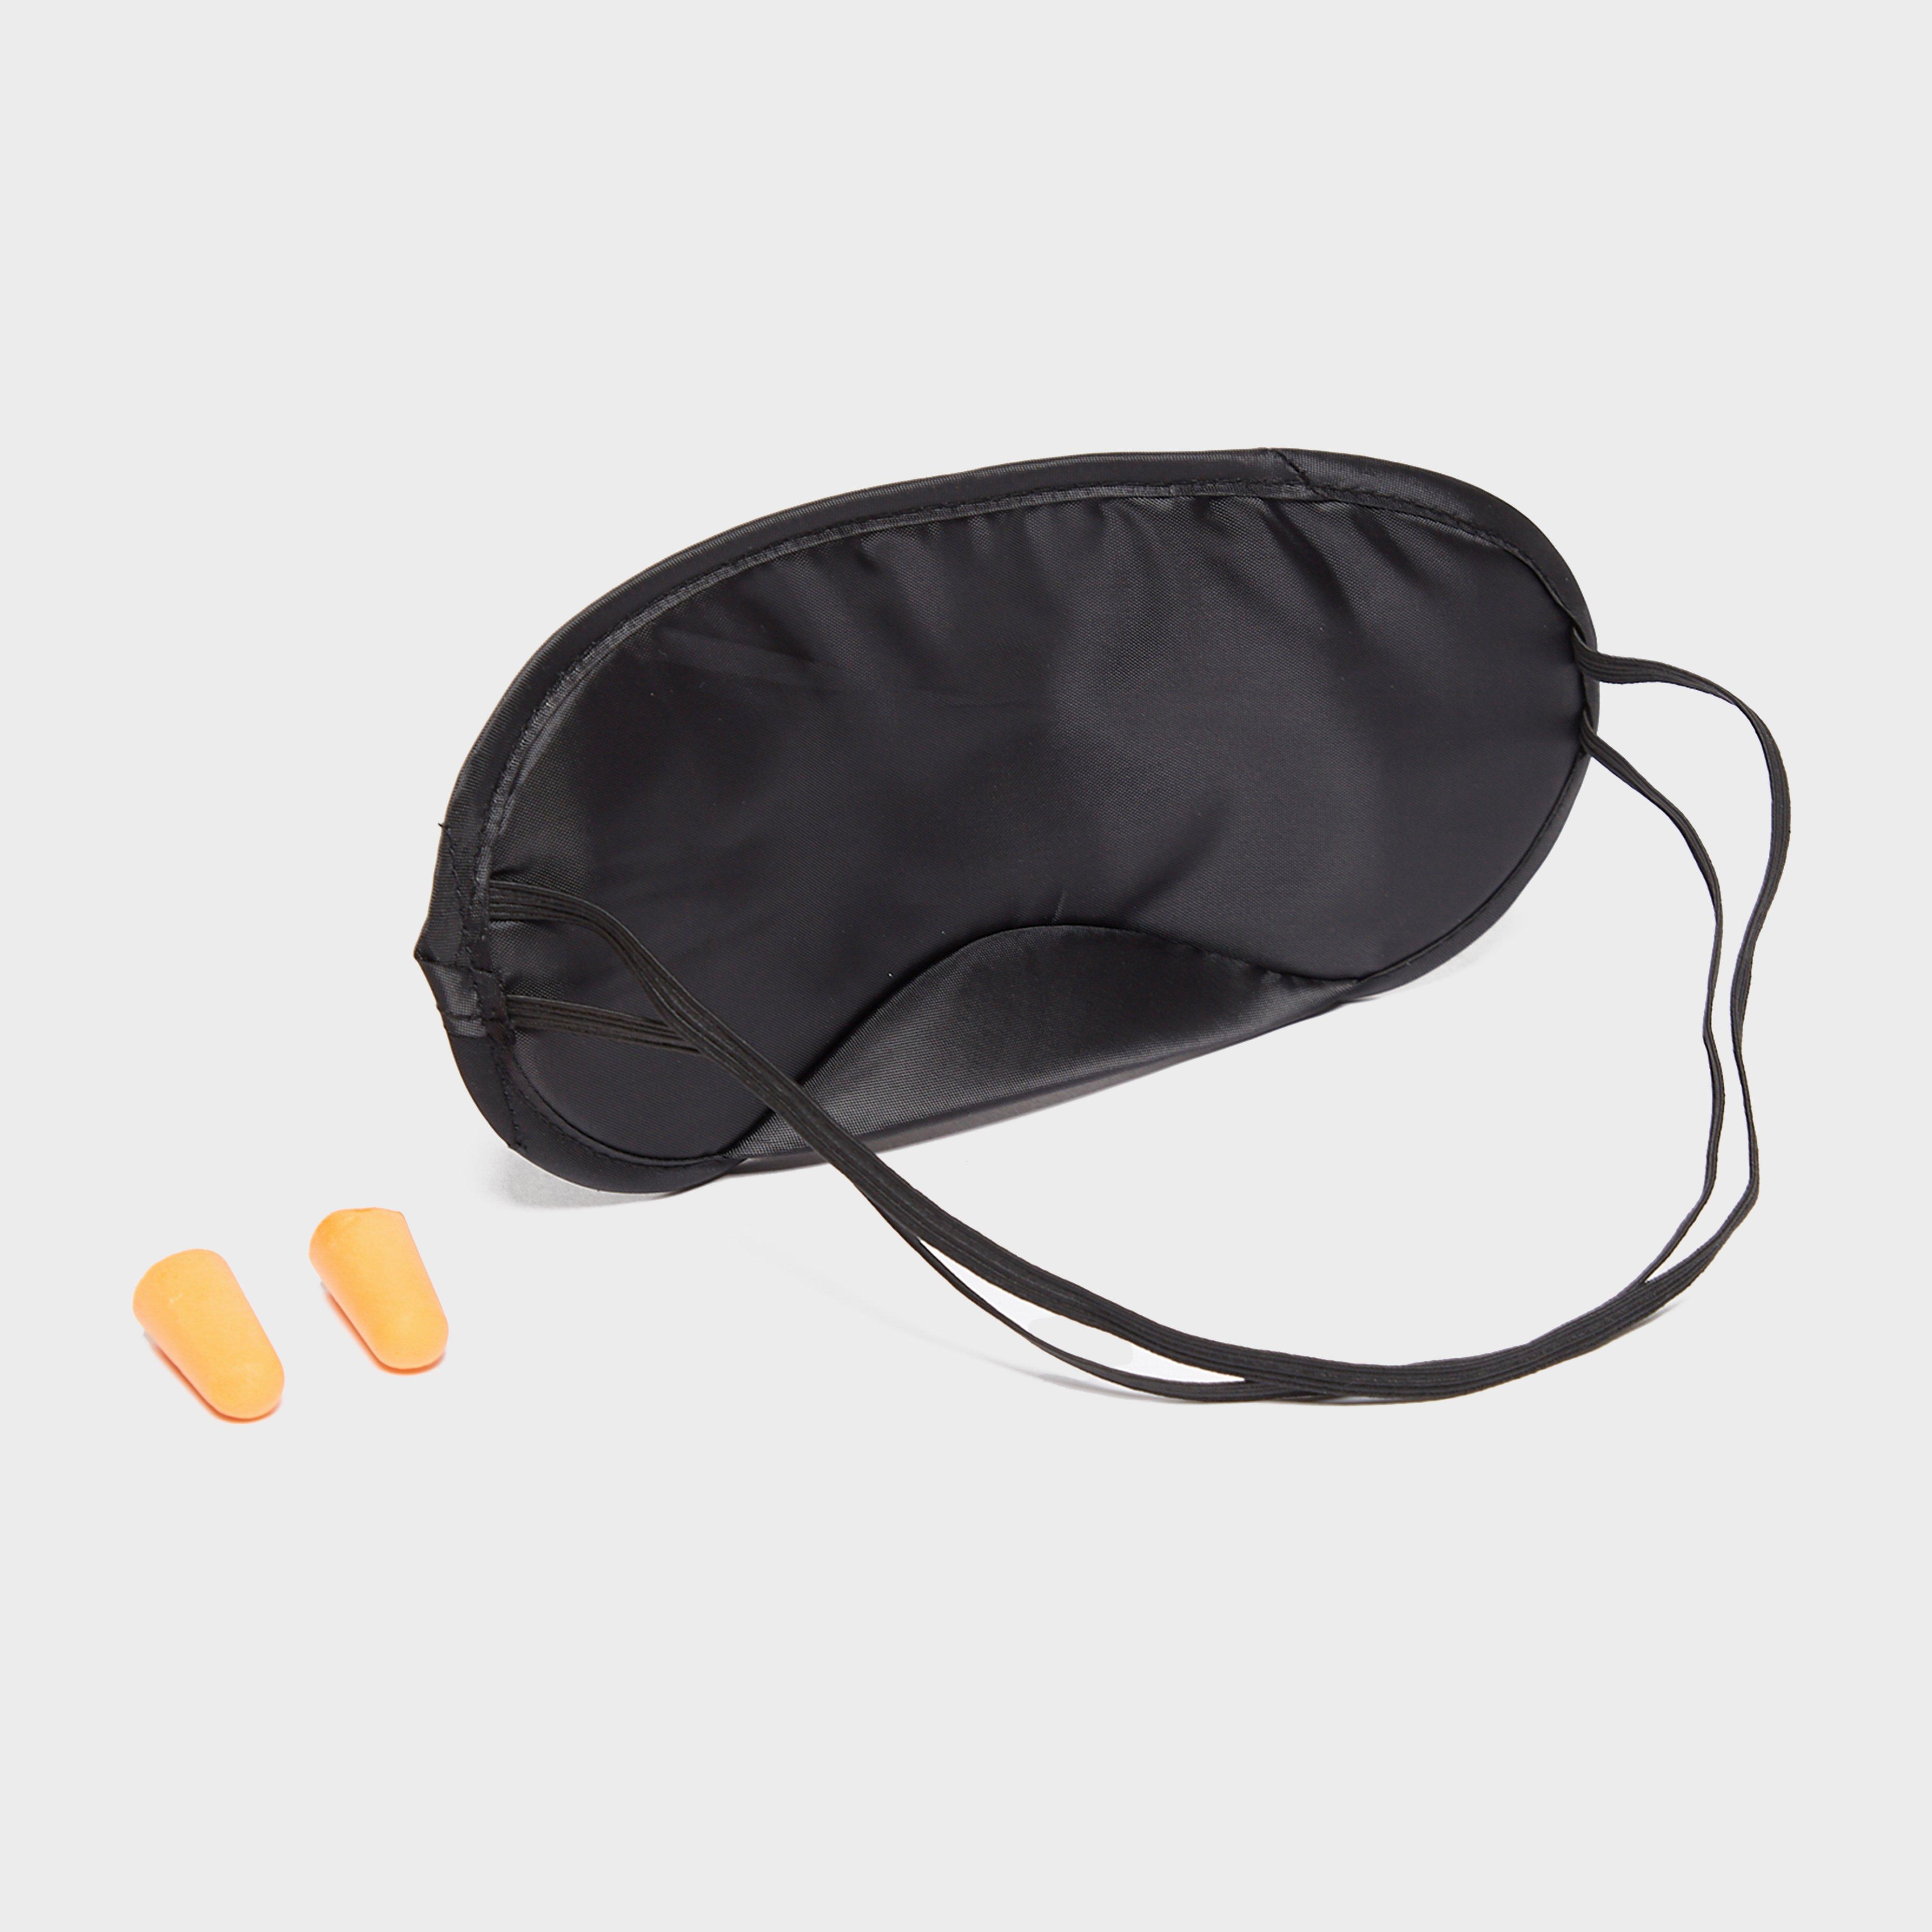 Technicals Travel Sleep Kit Review